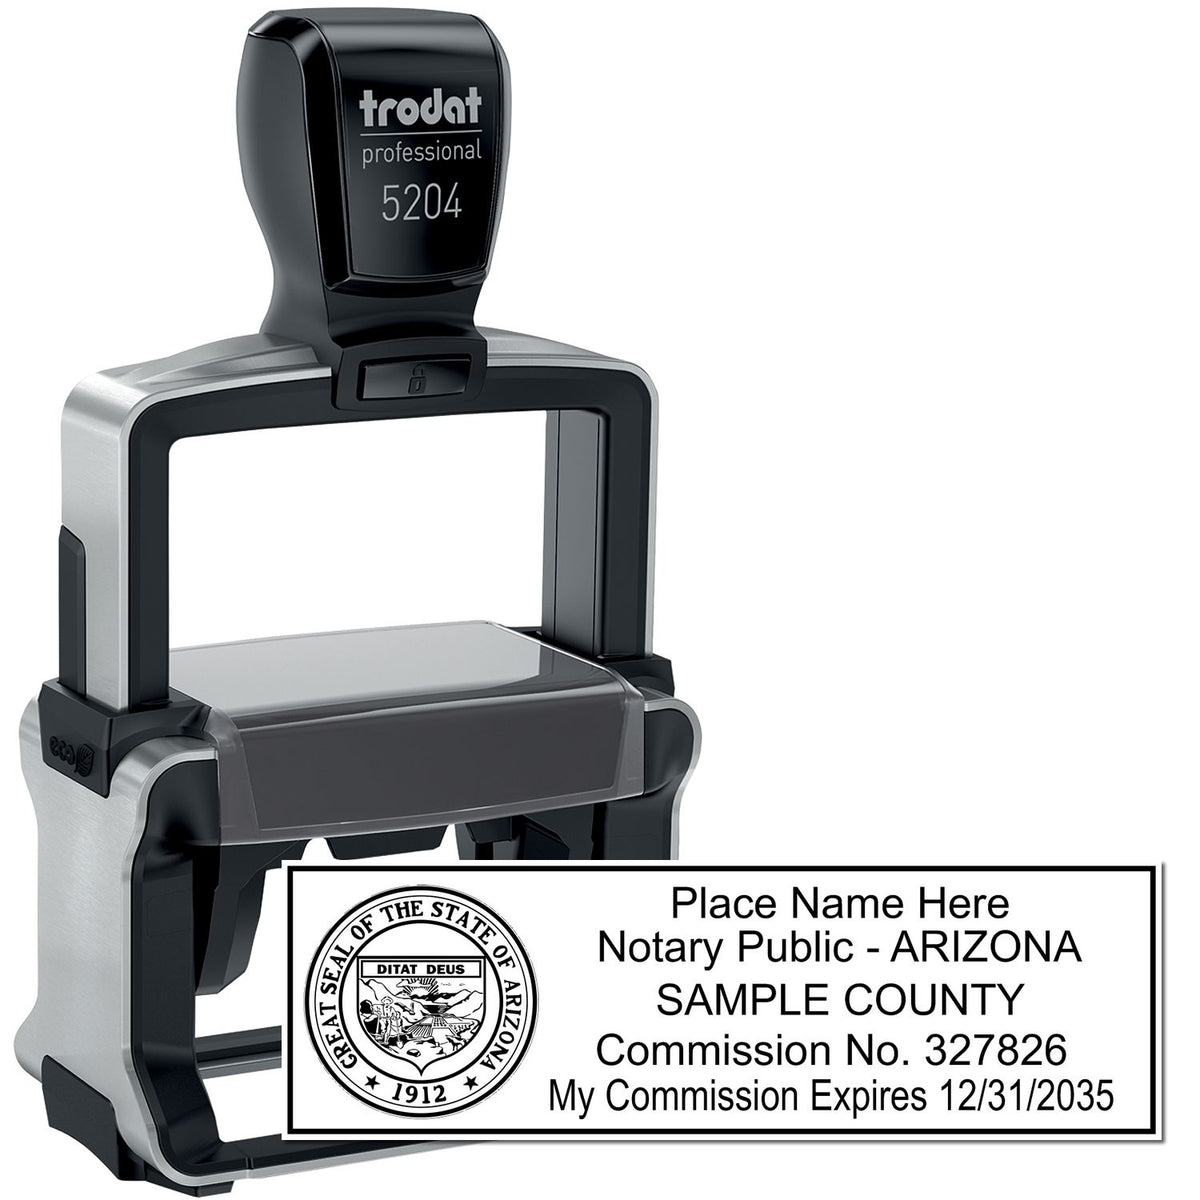 The main image for the Heavy-Duty Arizona Rectangular Notary Stamp depicting a sample of the imprint and electronic files